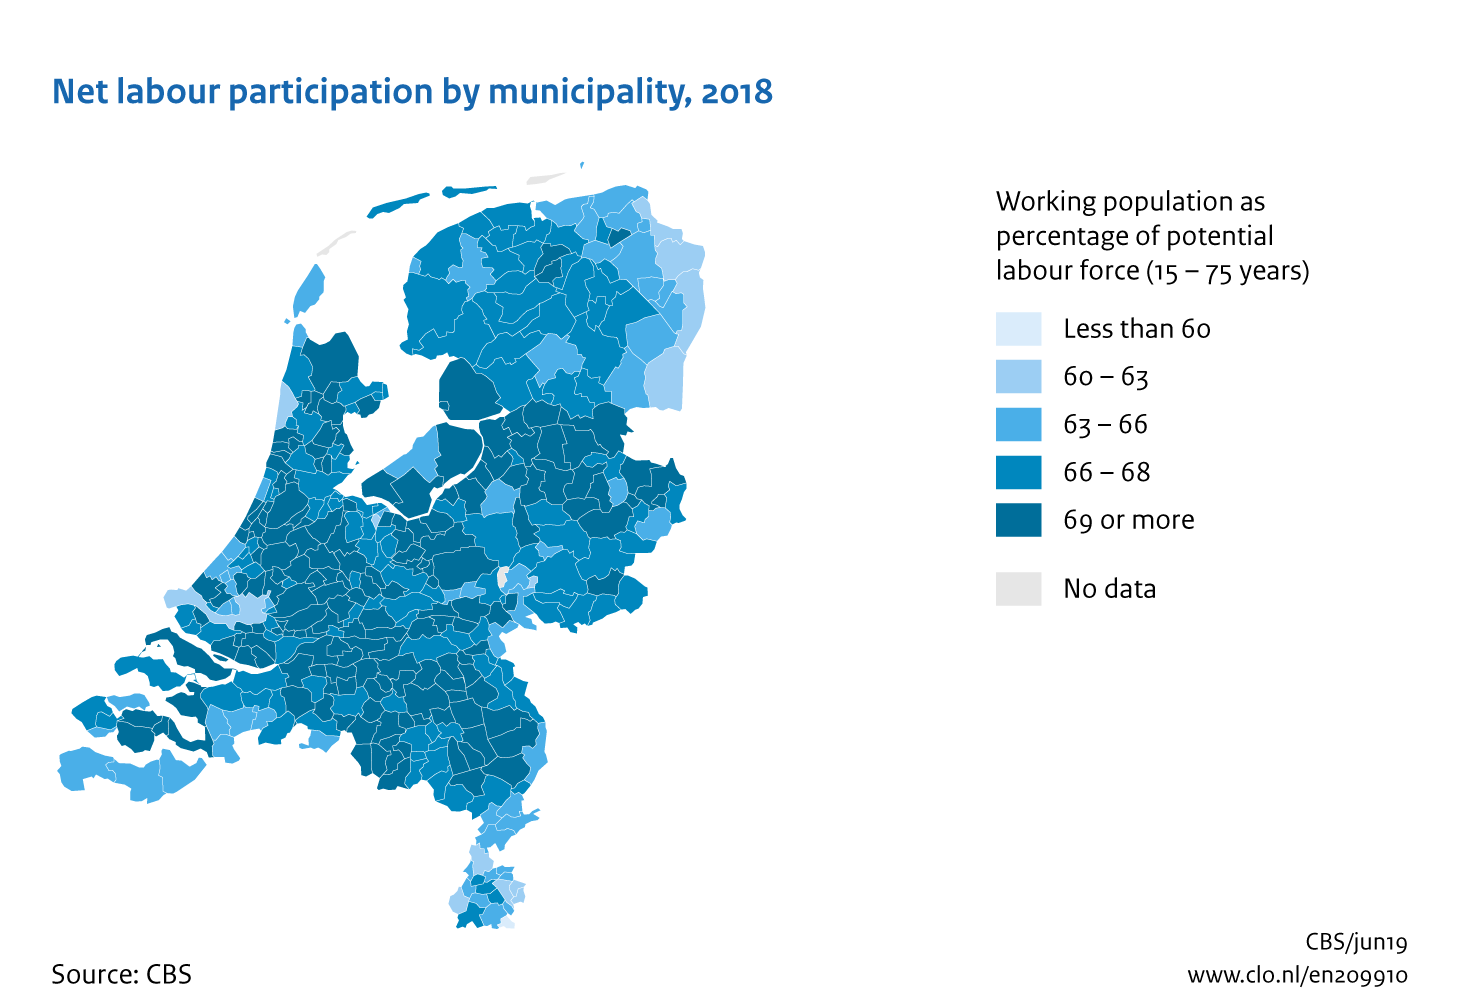 Image Net labour participation rate per municipality. The image is further explained in the text.